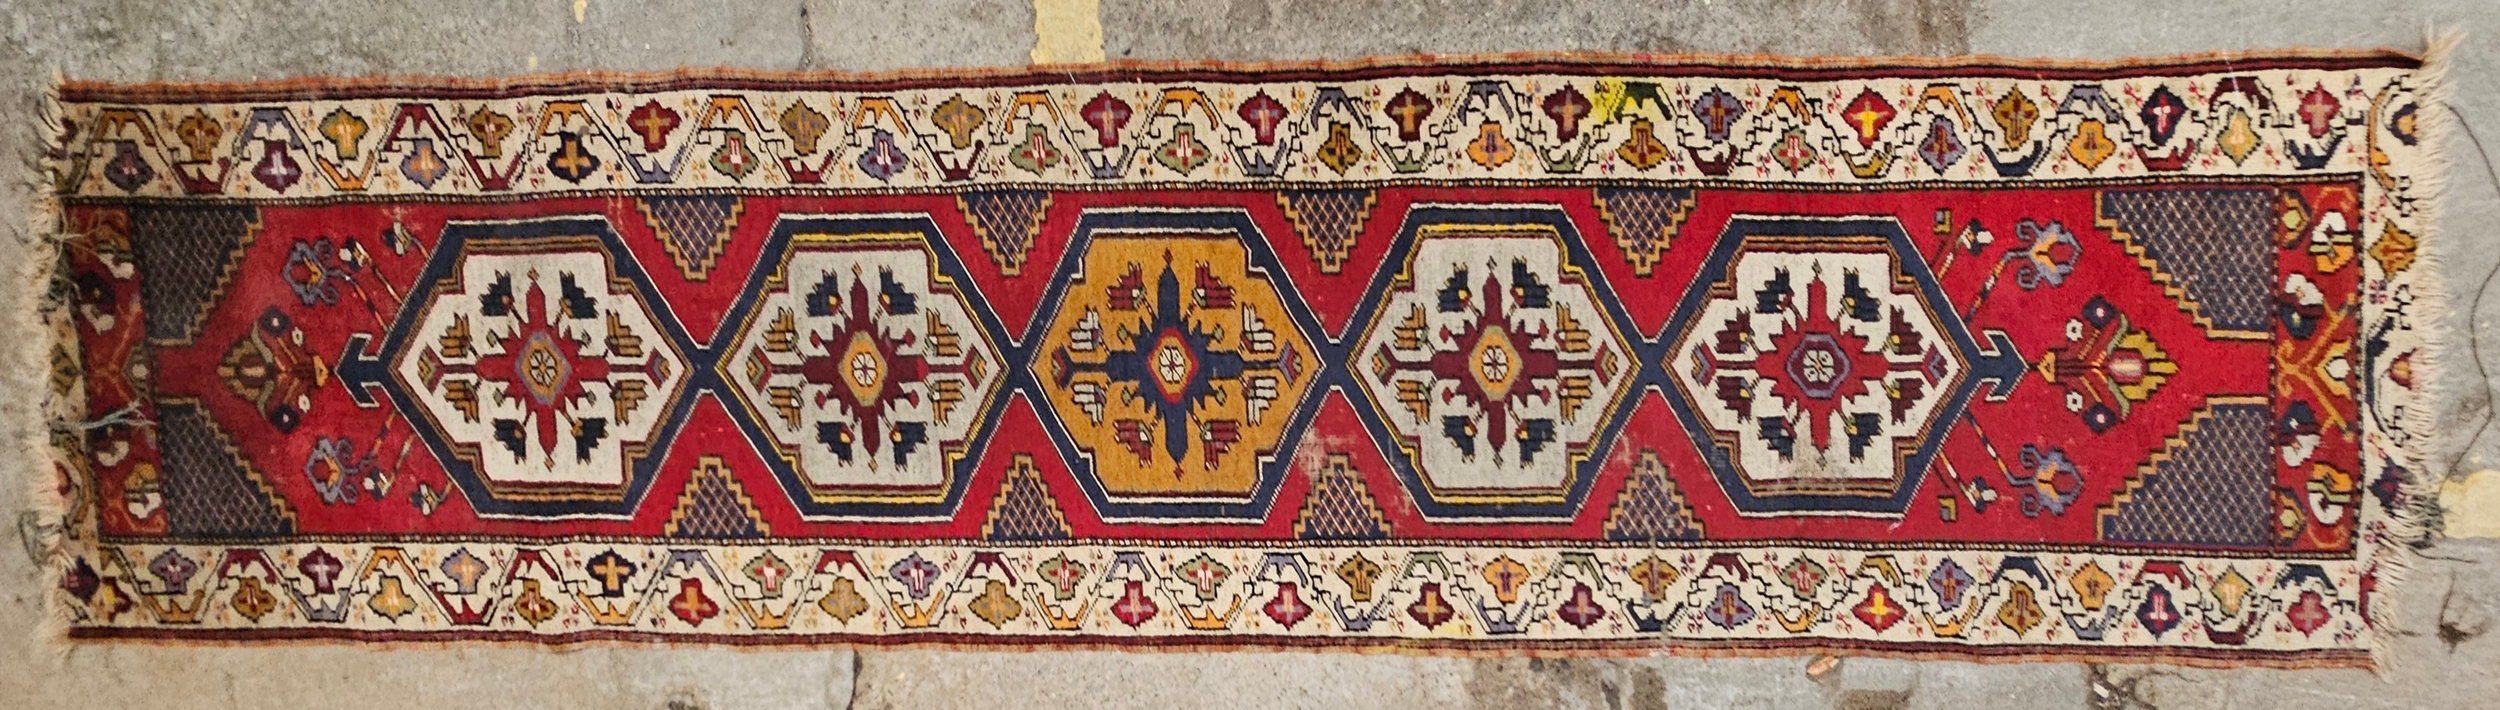 A Talish runner with repeating medallions on a burgundy ground. H.380 W.75cm.